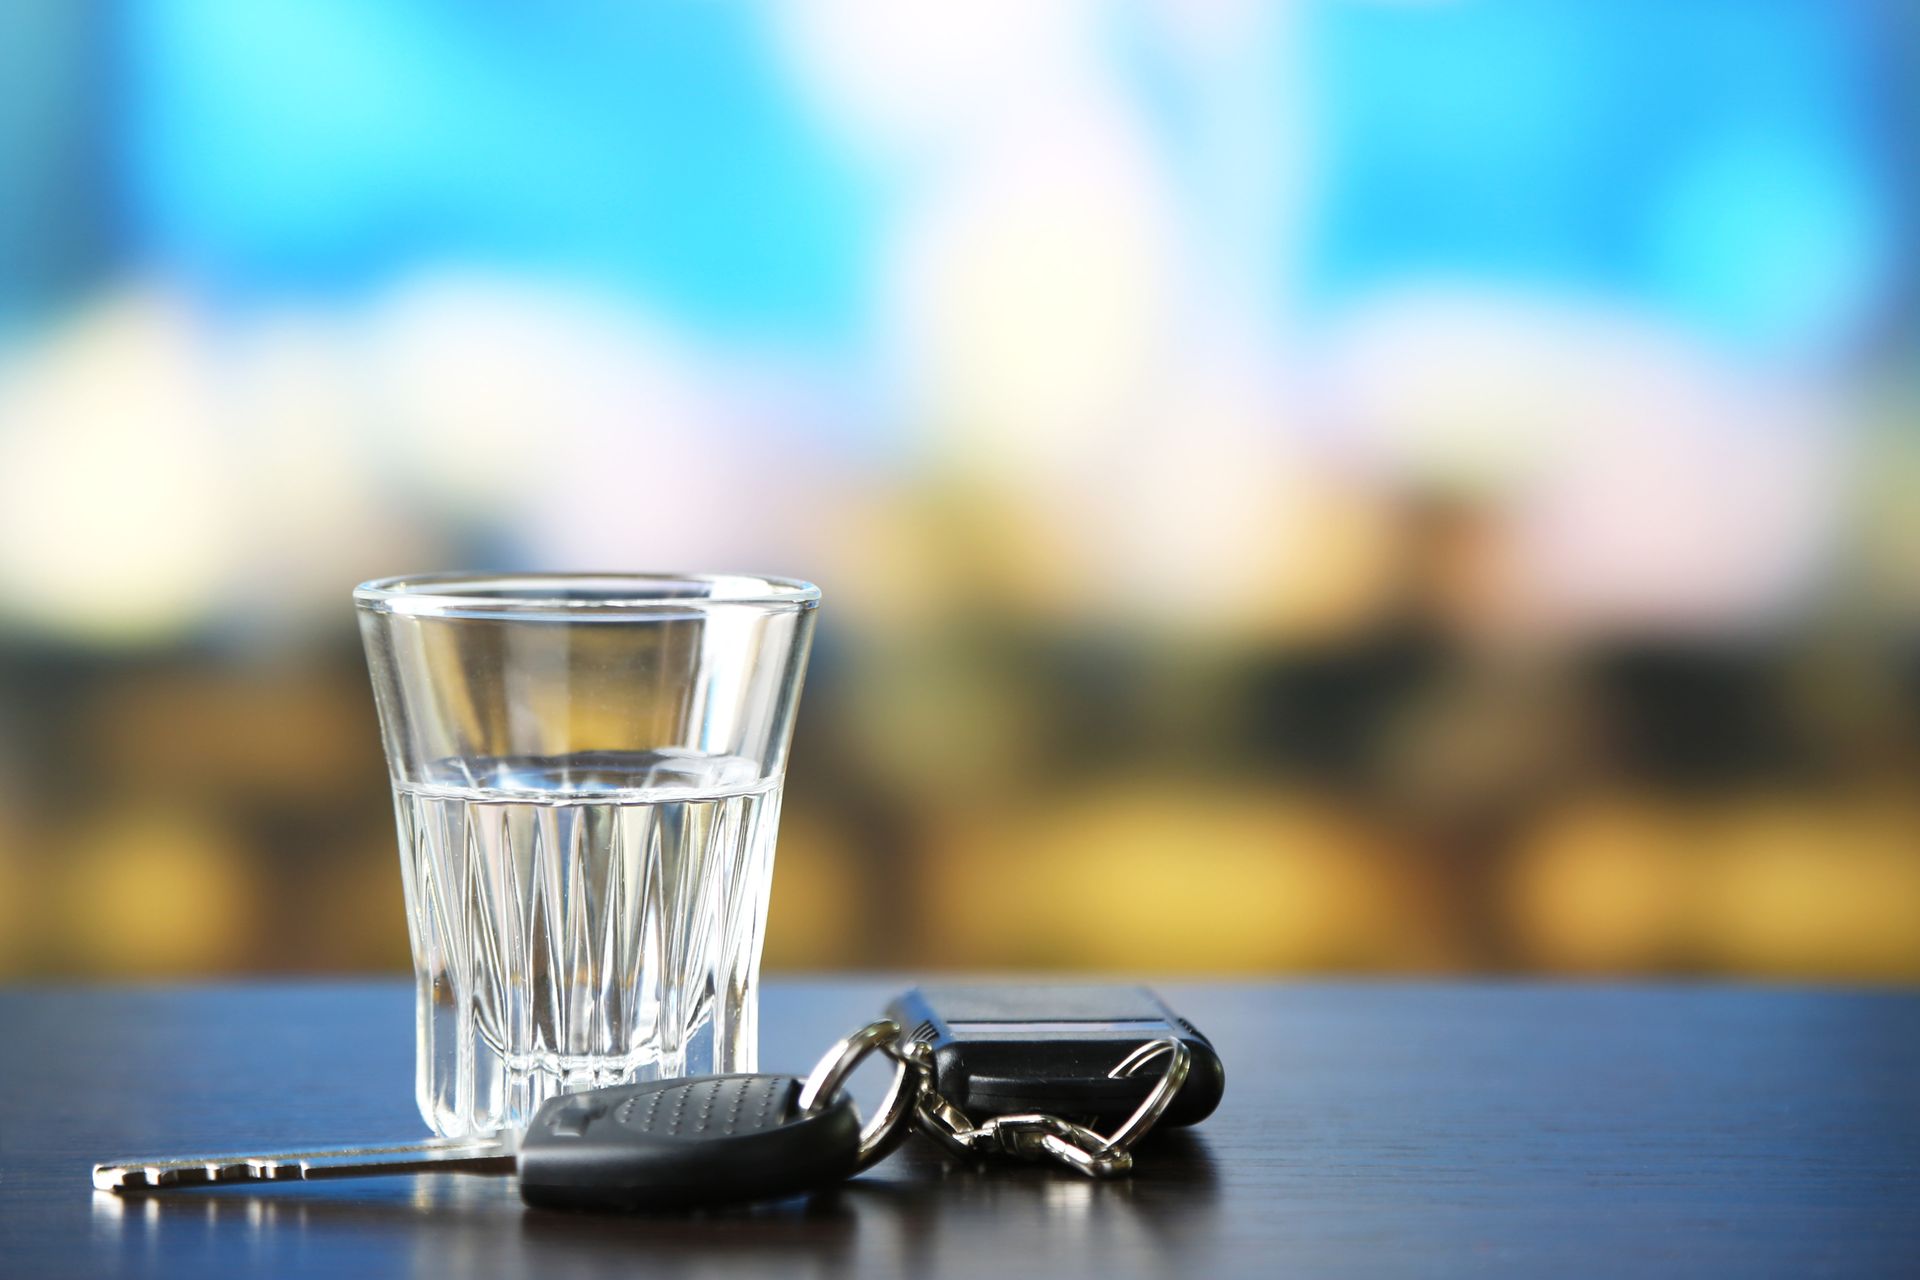 An image of a car key next to an empty glass